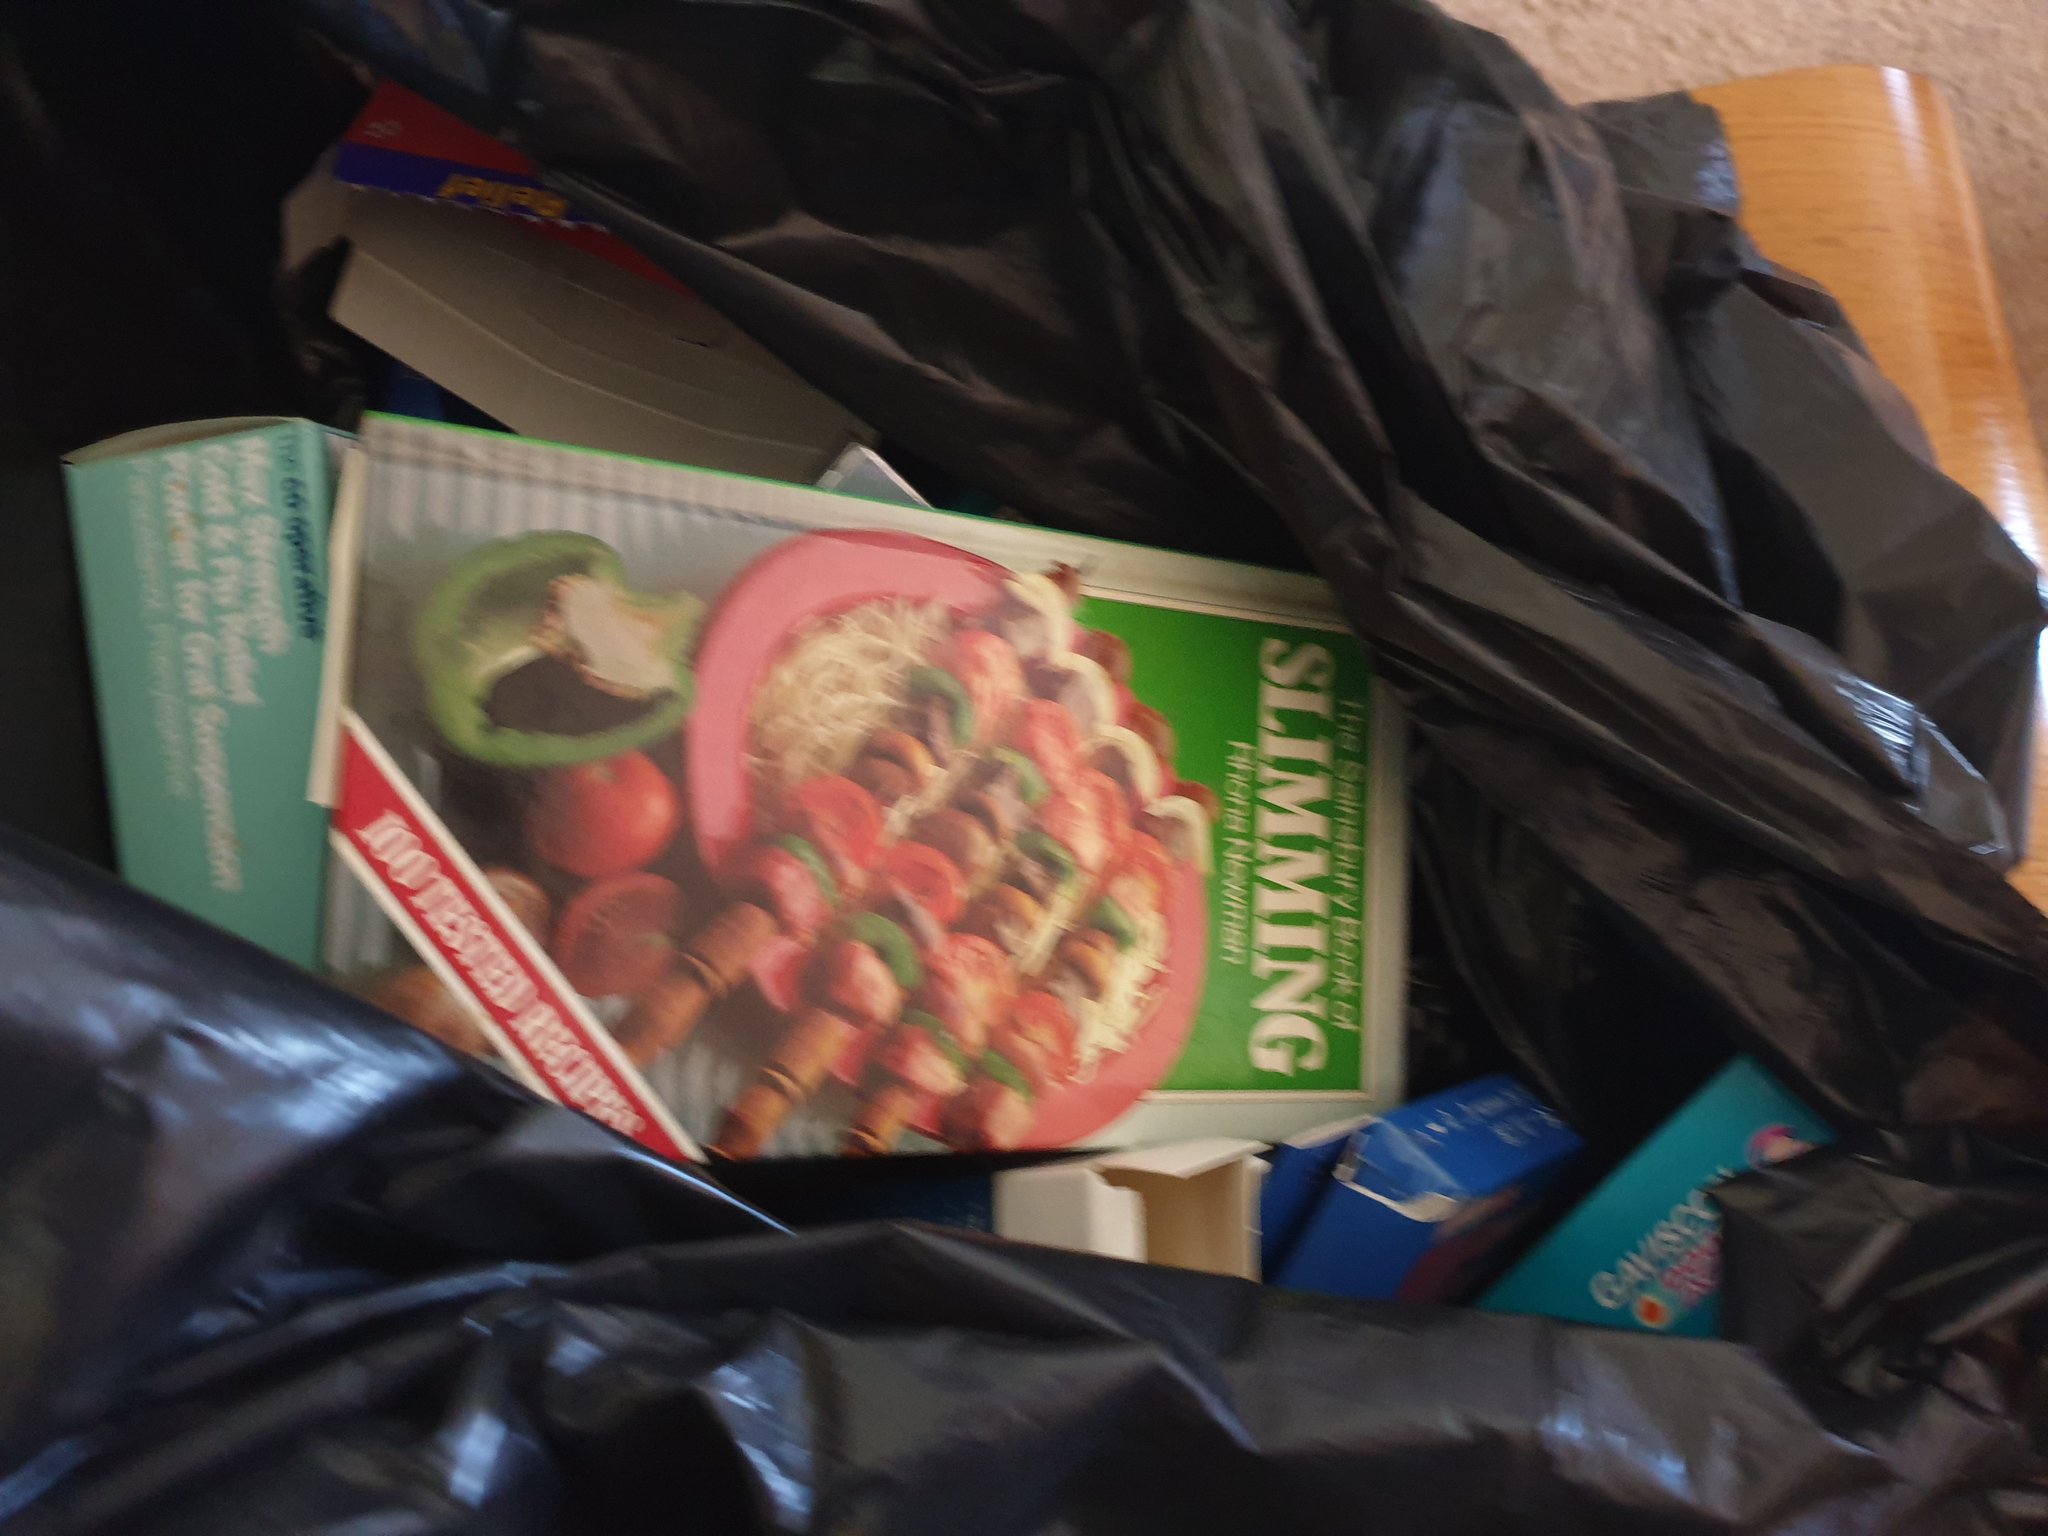 The book, in a bin bag ready to be thrown away